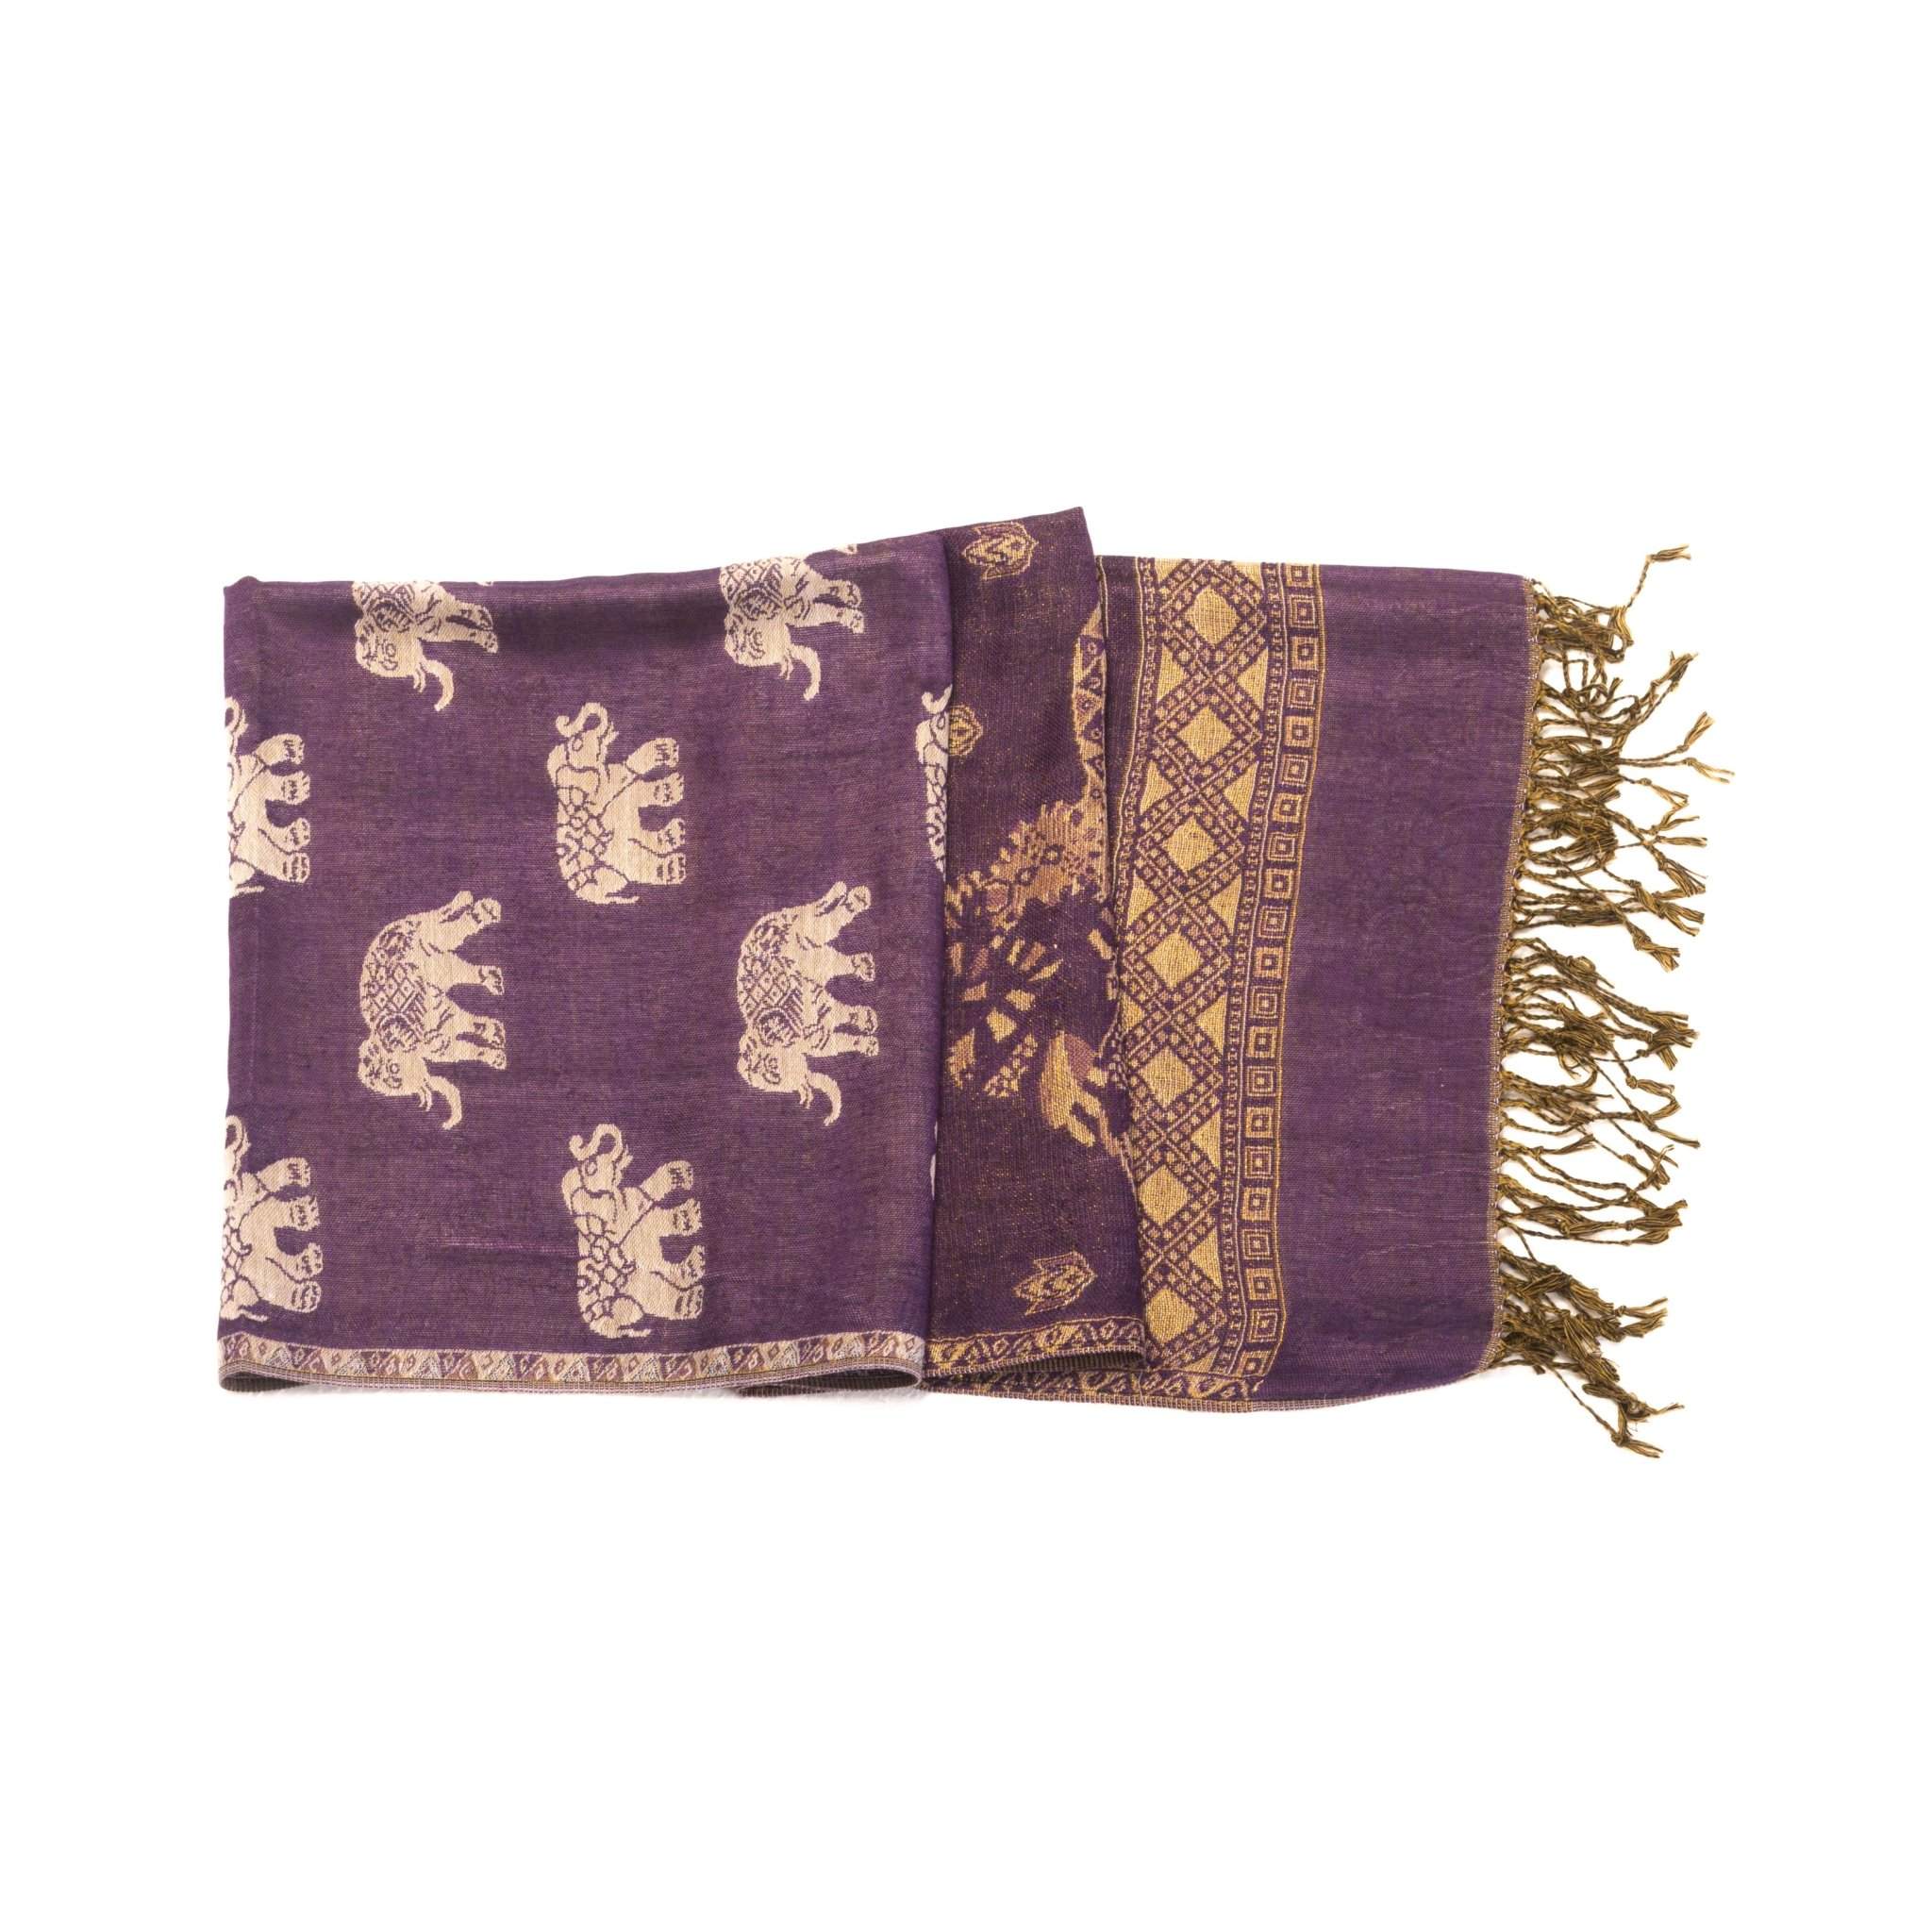 JAIPUR ELEPHANT SCARF Elepanta Scarves - Buy Today Elephant Pants Jewelry And Bohemian Clothes Handmade In Thailand Help To Save The Elephants FairTrade And Vegan